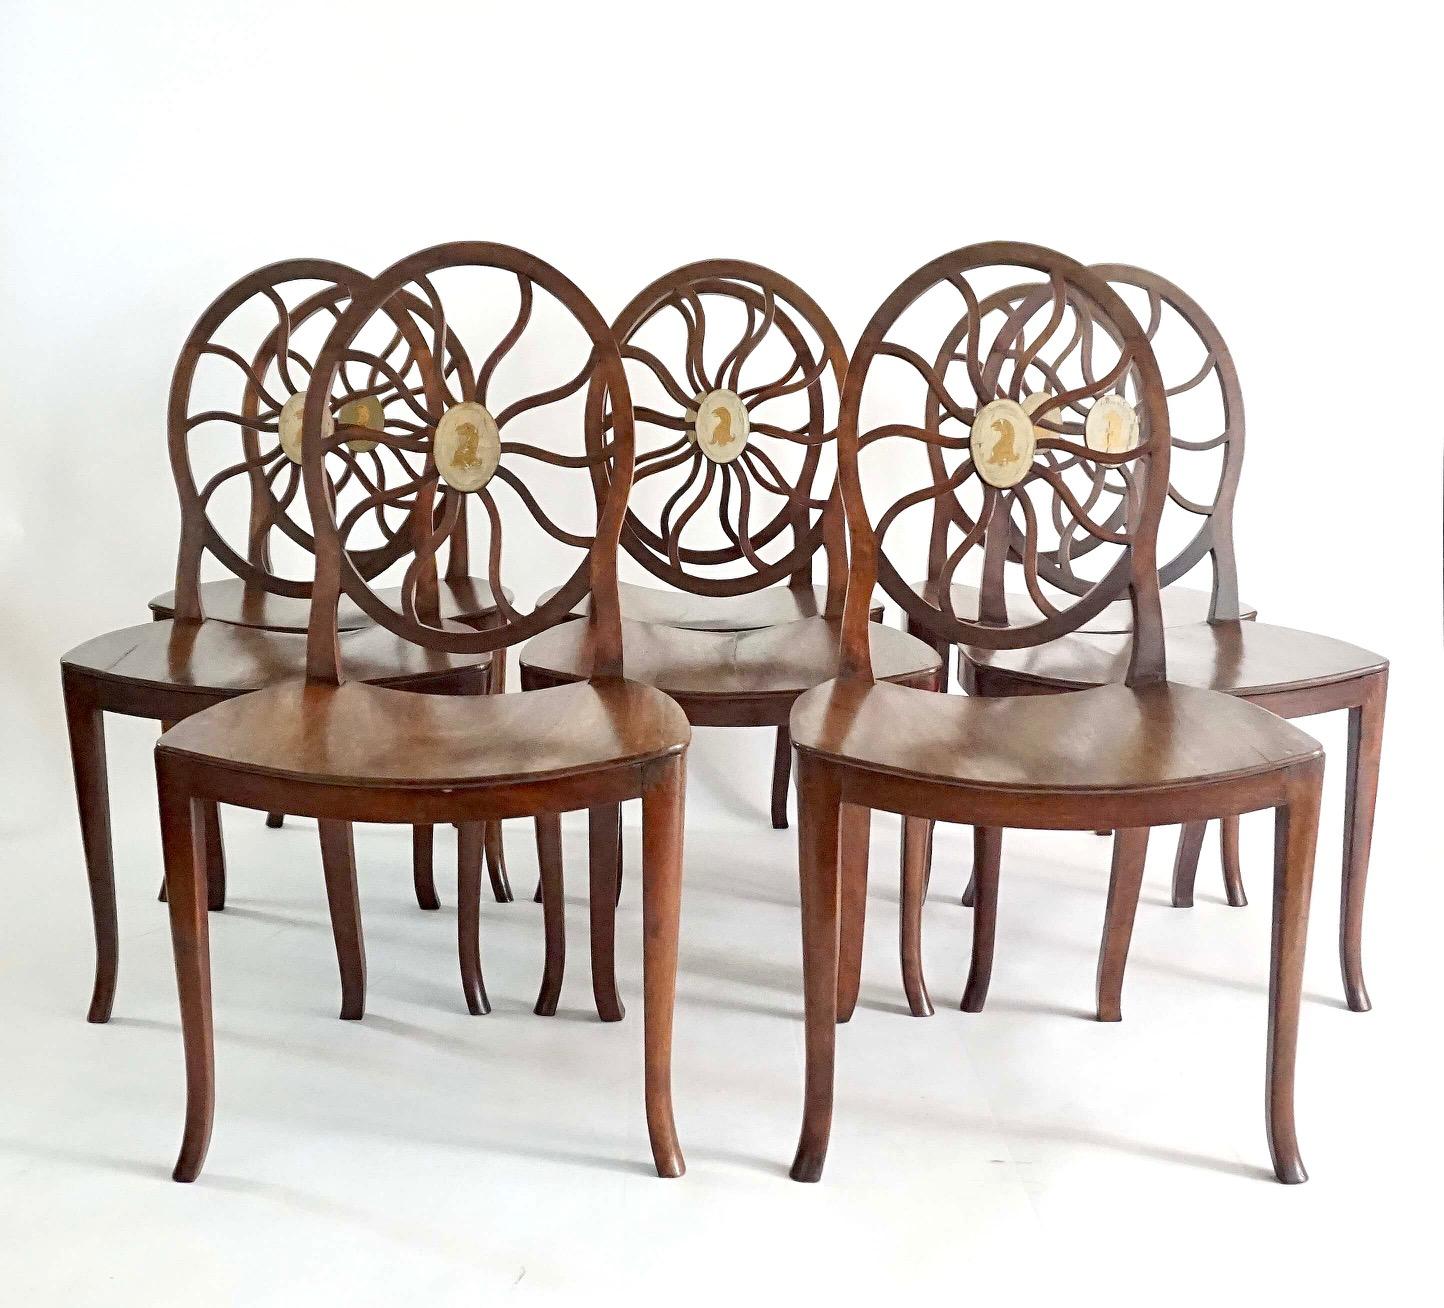 Rare and elegant set of eight circa 1790 English George III period Hepplewhite style hall or dining chairs of solid mahogany construction having oval backs with radiating 'cobweb' or 'spider web' variant design splats with central oval reserves